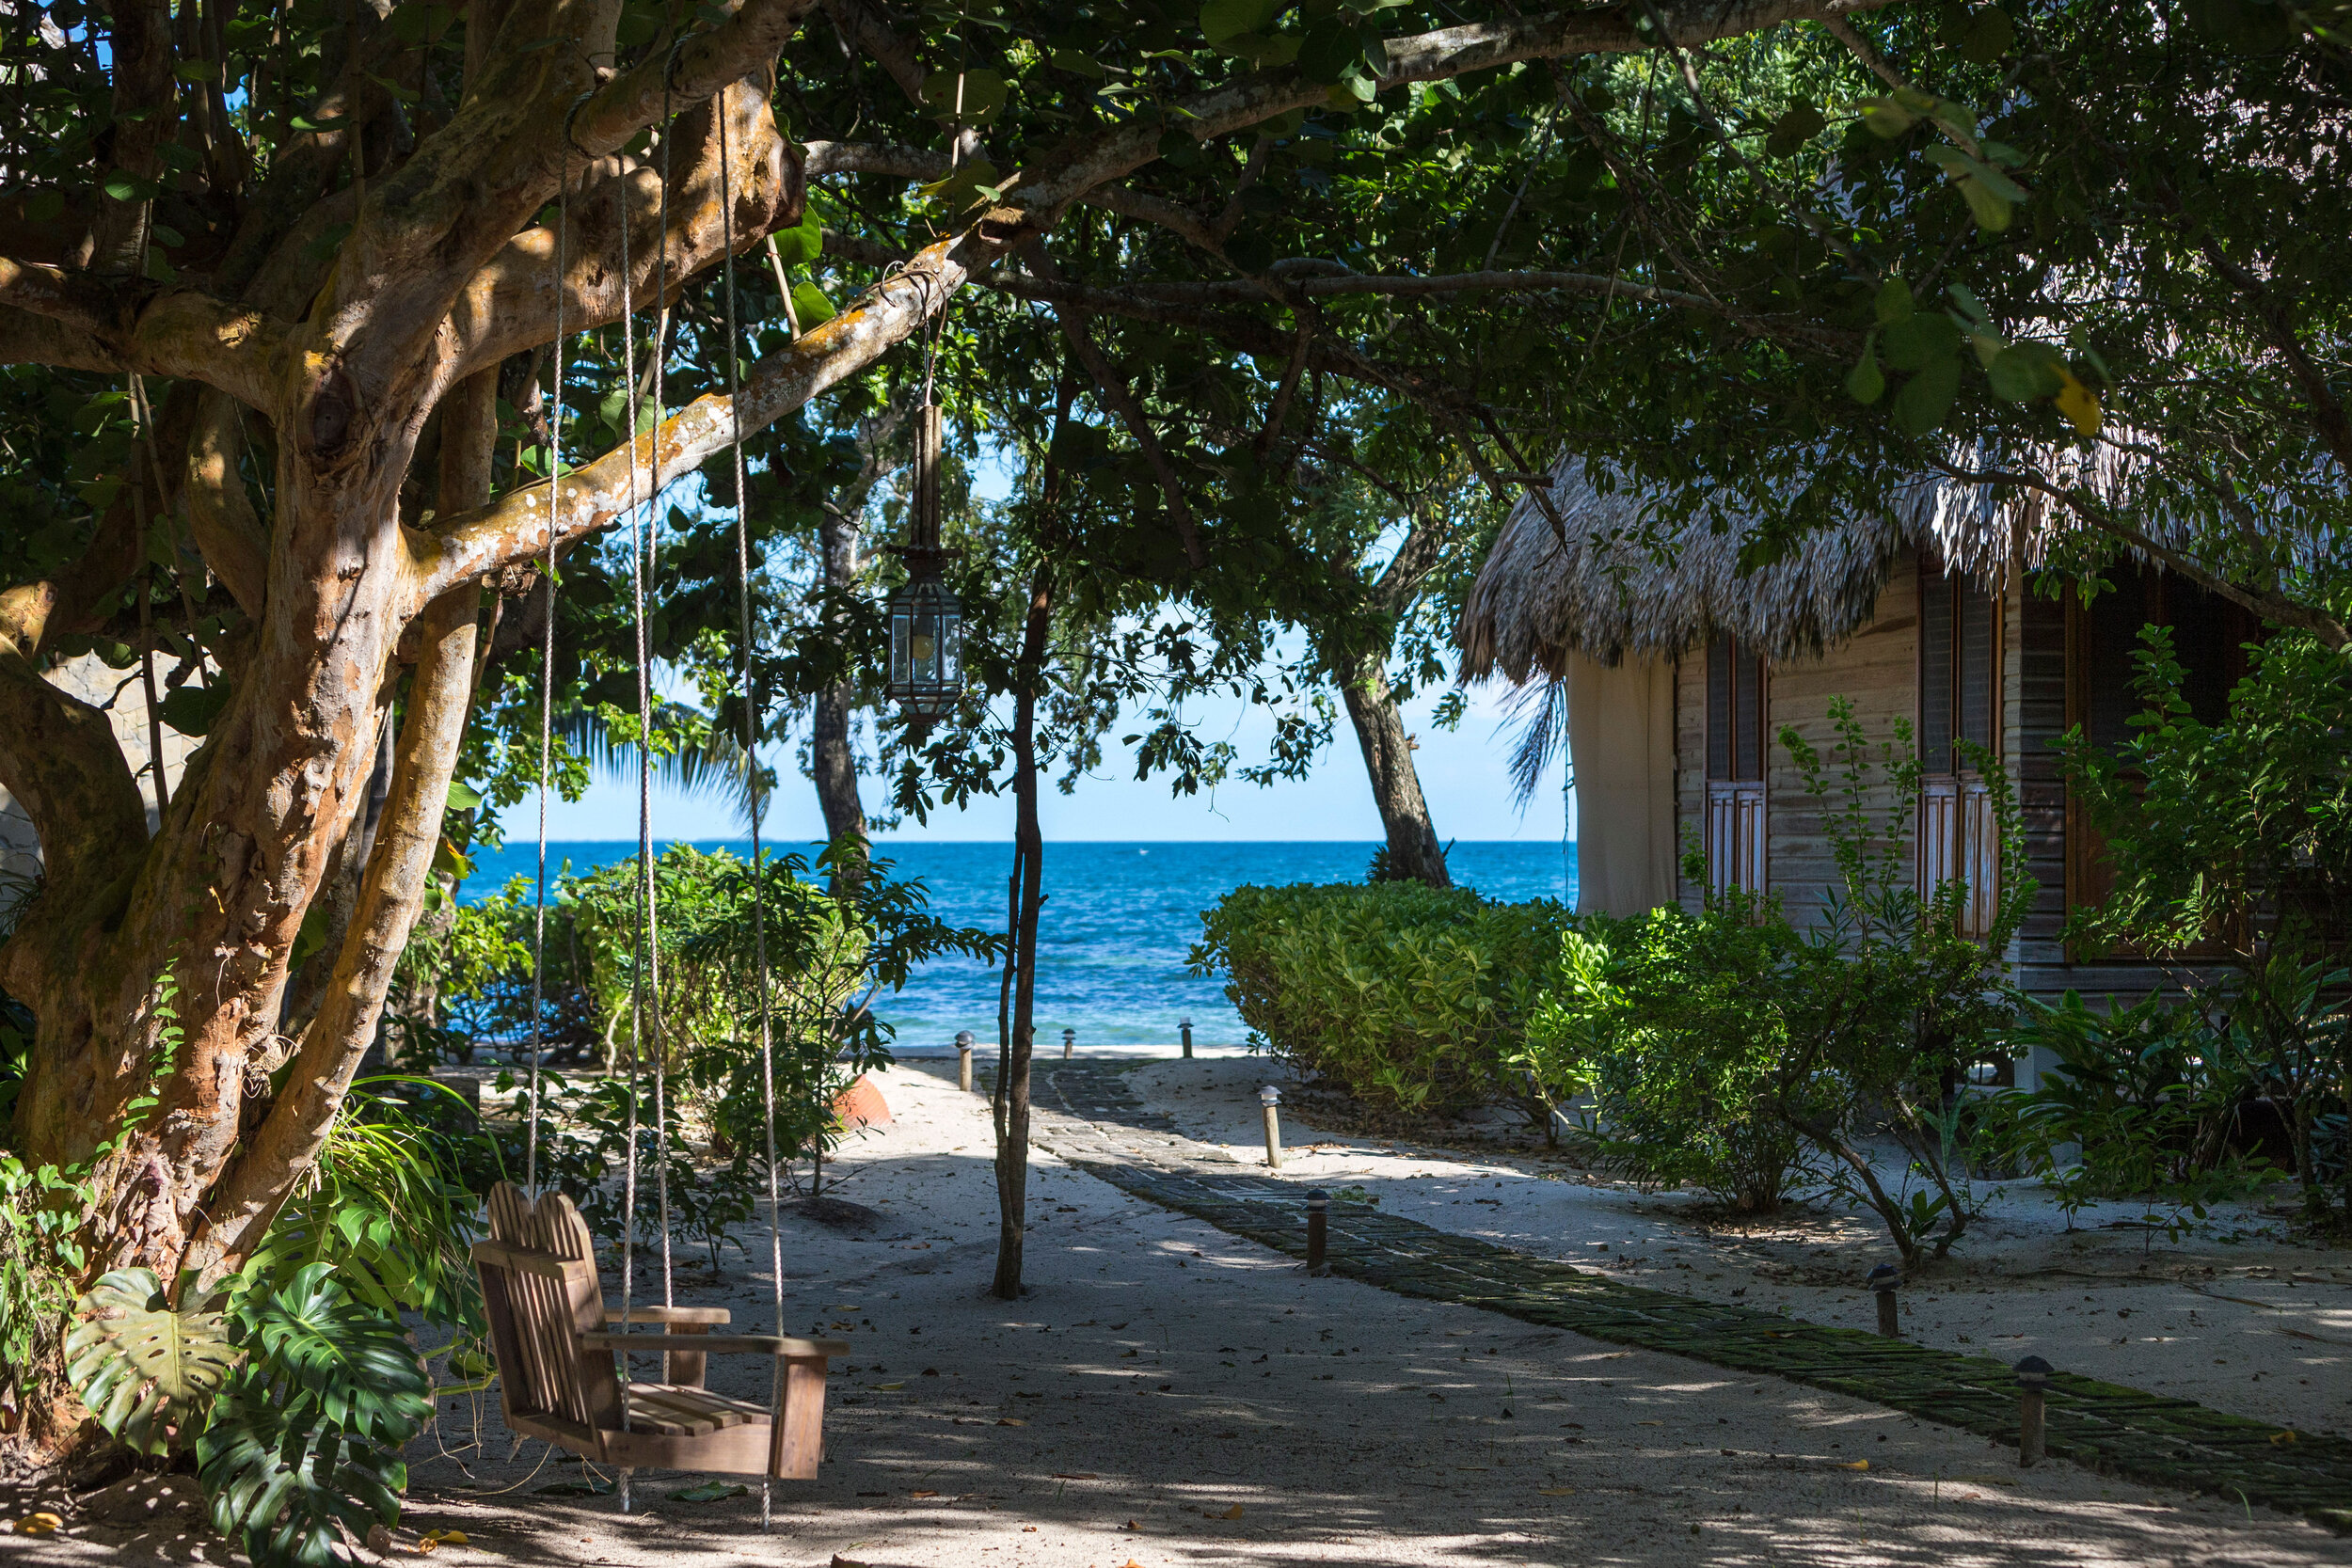   View out to the sea at Turtle Inn (photo credit: The Family Coppola Hideaways)  